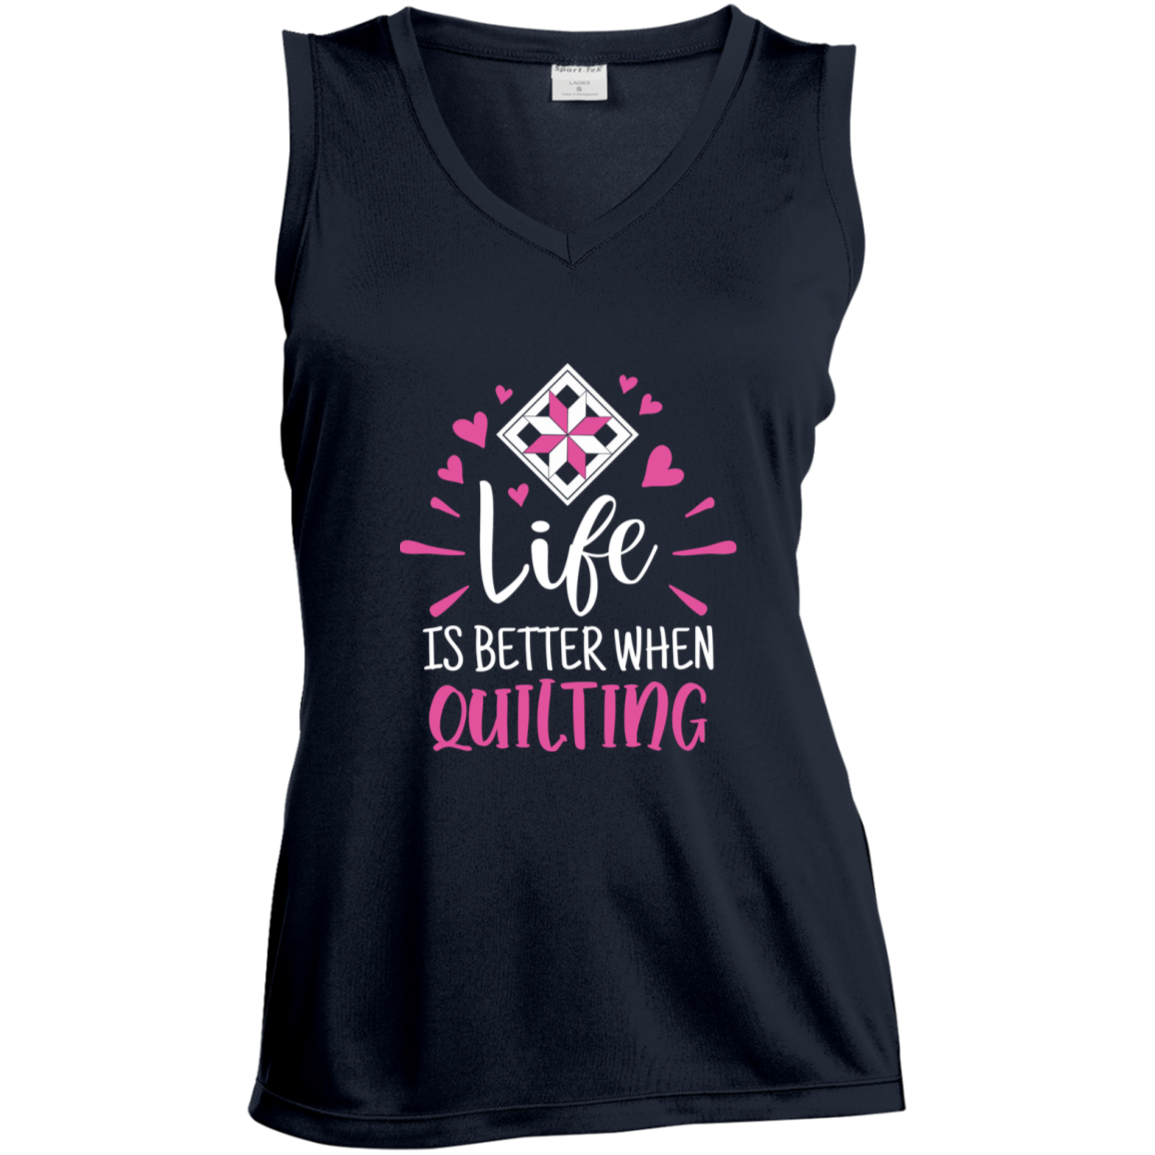 Life is Better When Quilting Ladies' Sleeveless Moisture Absorbing V-Neck